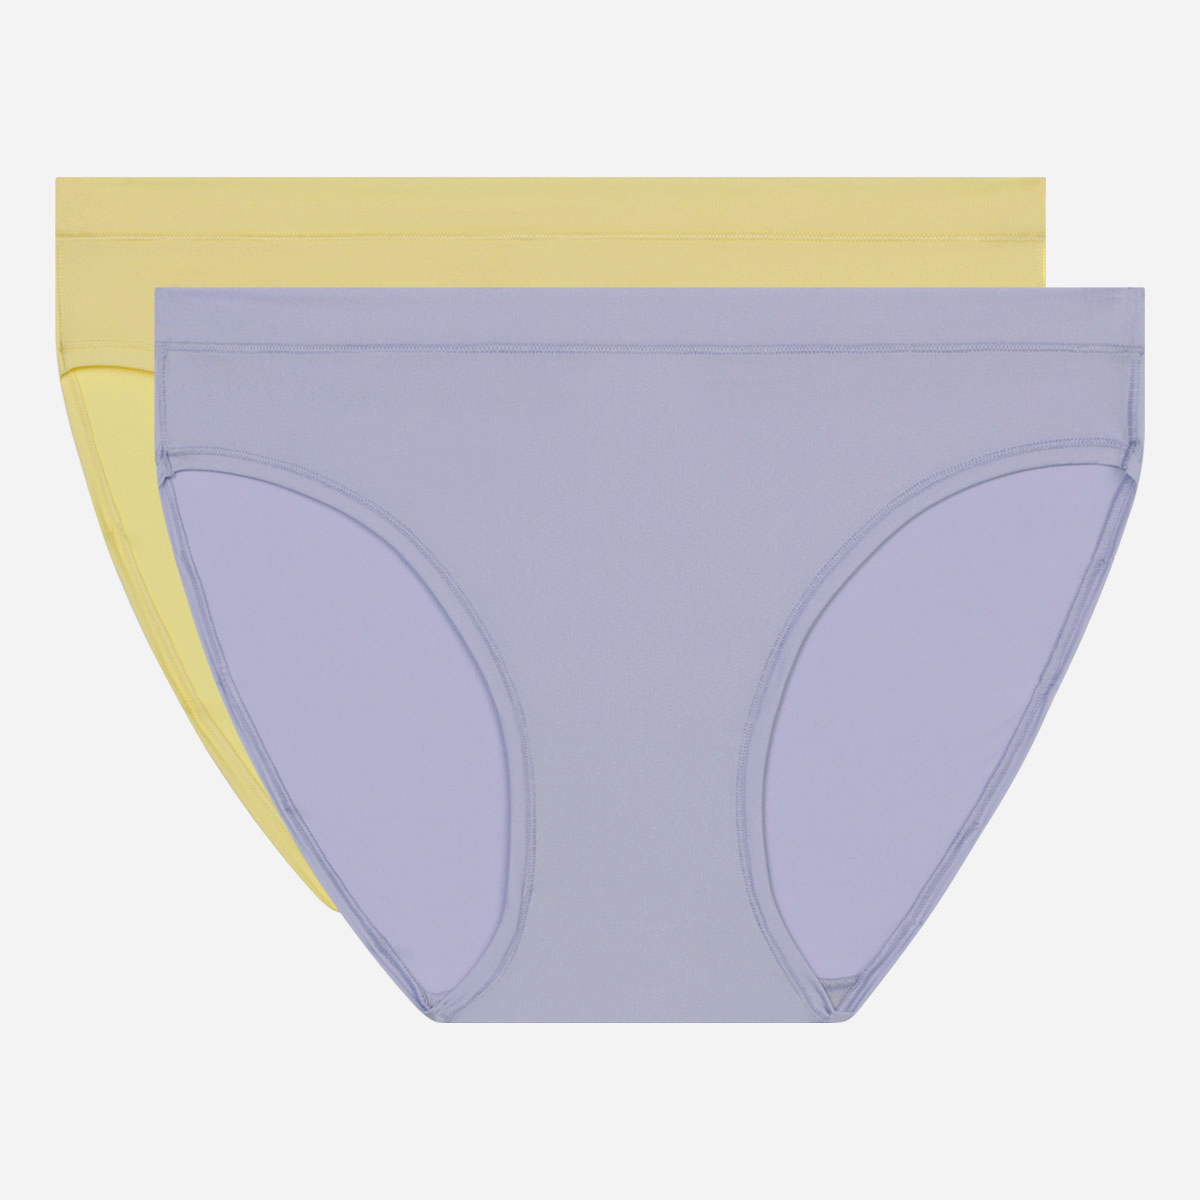 Pack of 2 second-skin knickers in cotton and nylon Pink Blue Oh My Dim's